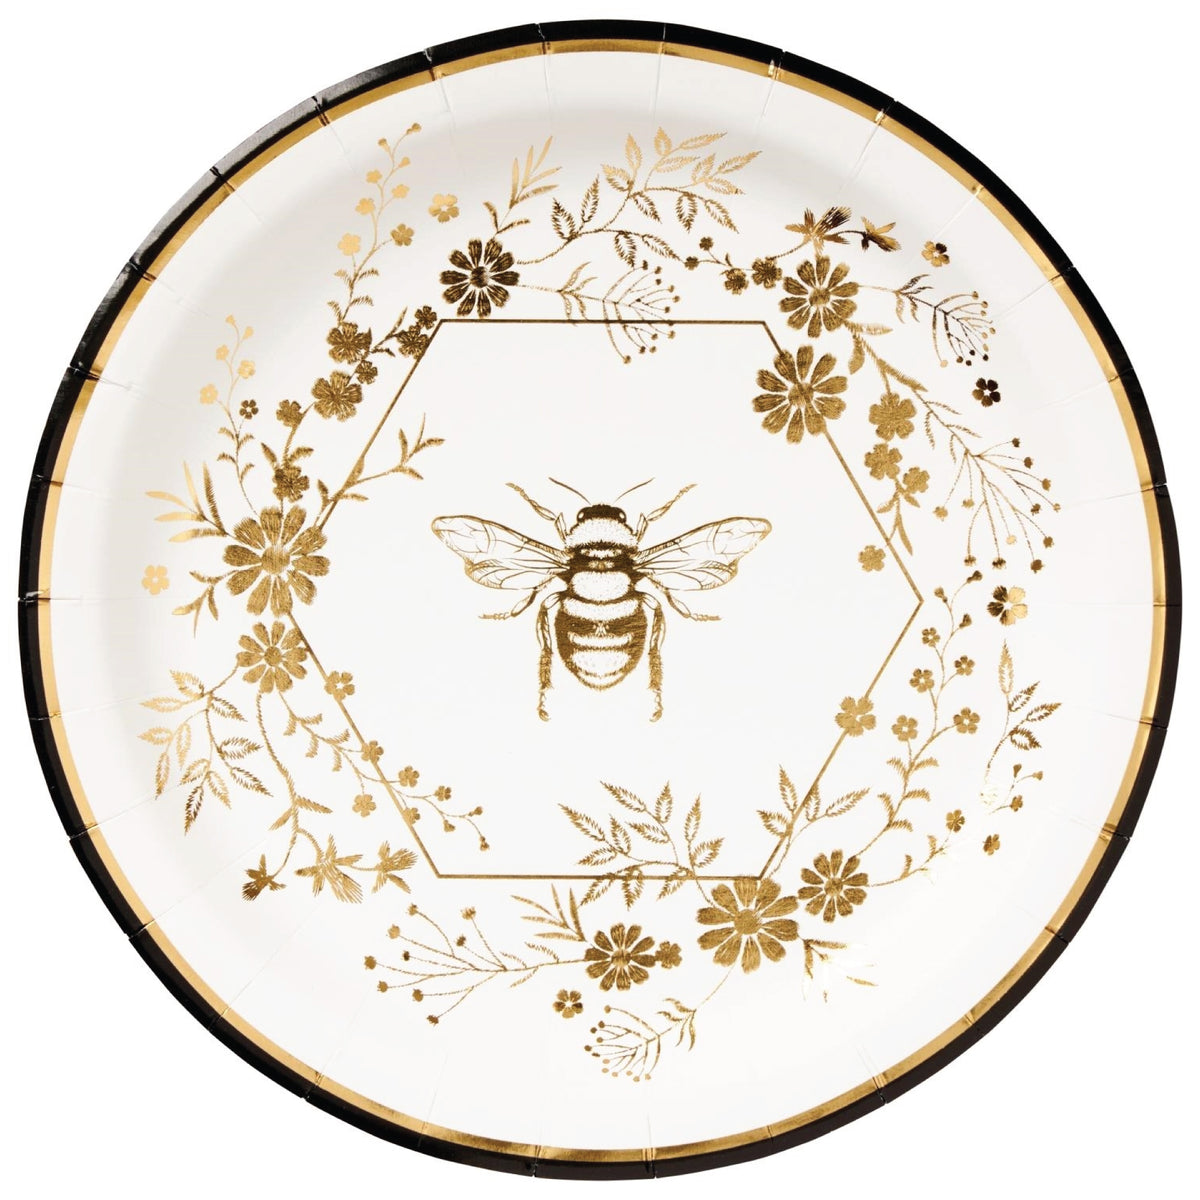 144 Piece Bumble Bee Party Supplies - Serves 24 Party Plates